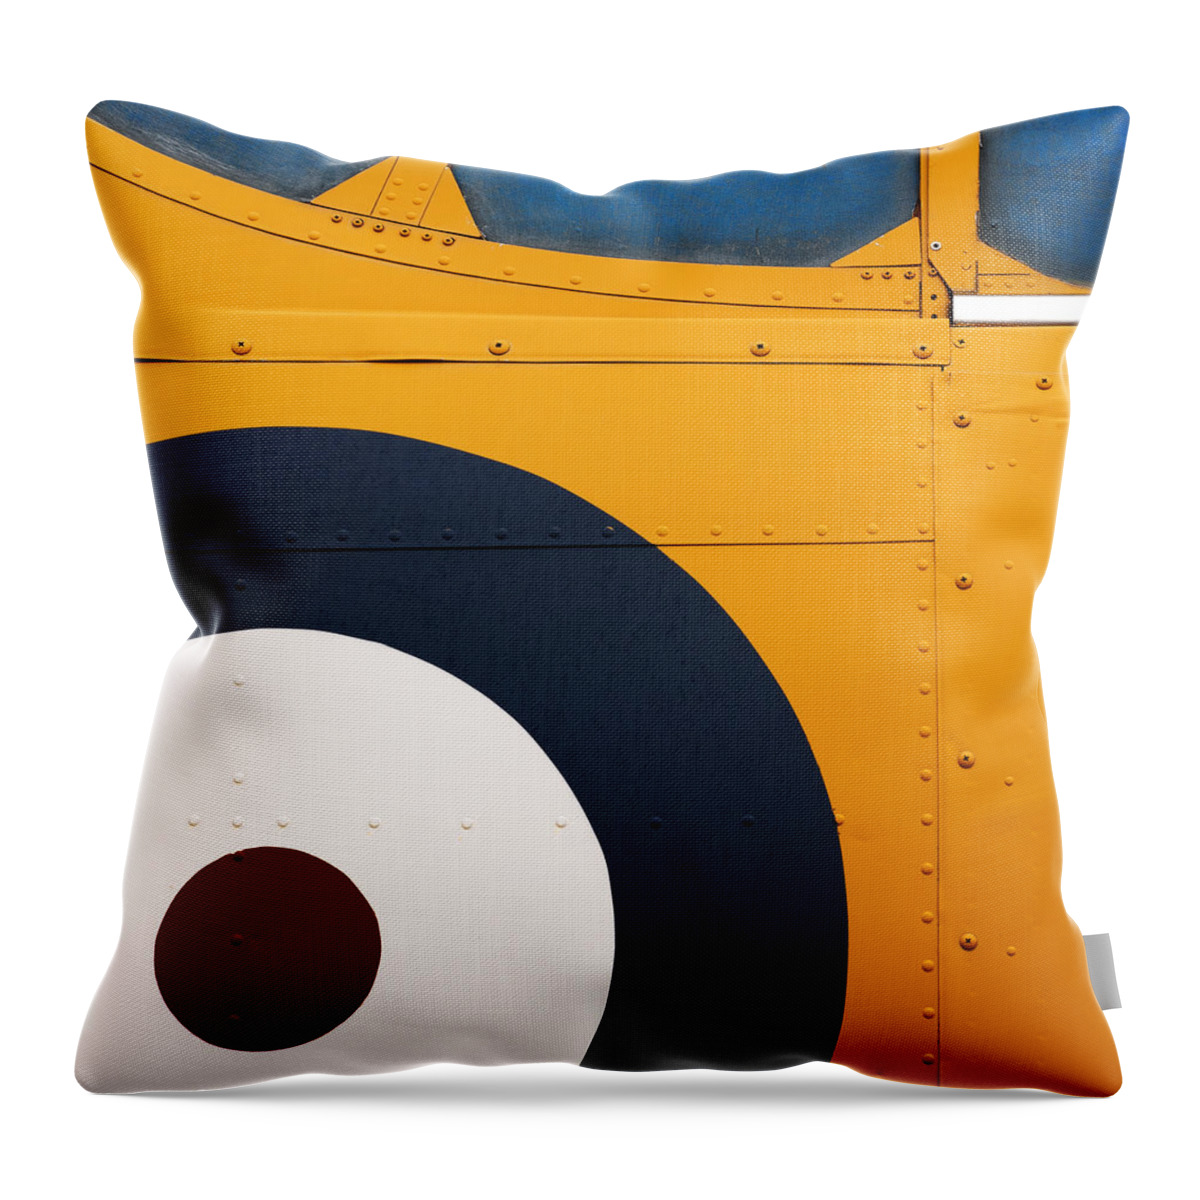 Design Throw Pillow featuring the photograph Vintage Airplane Abstract Design by Carol Leigh